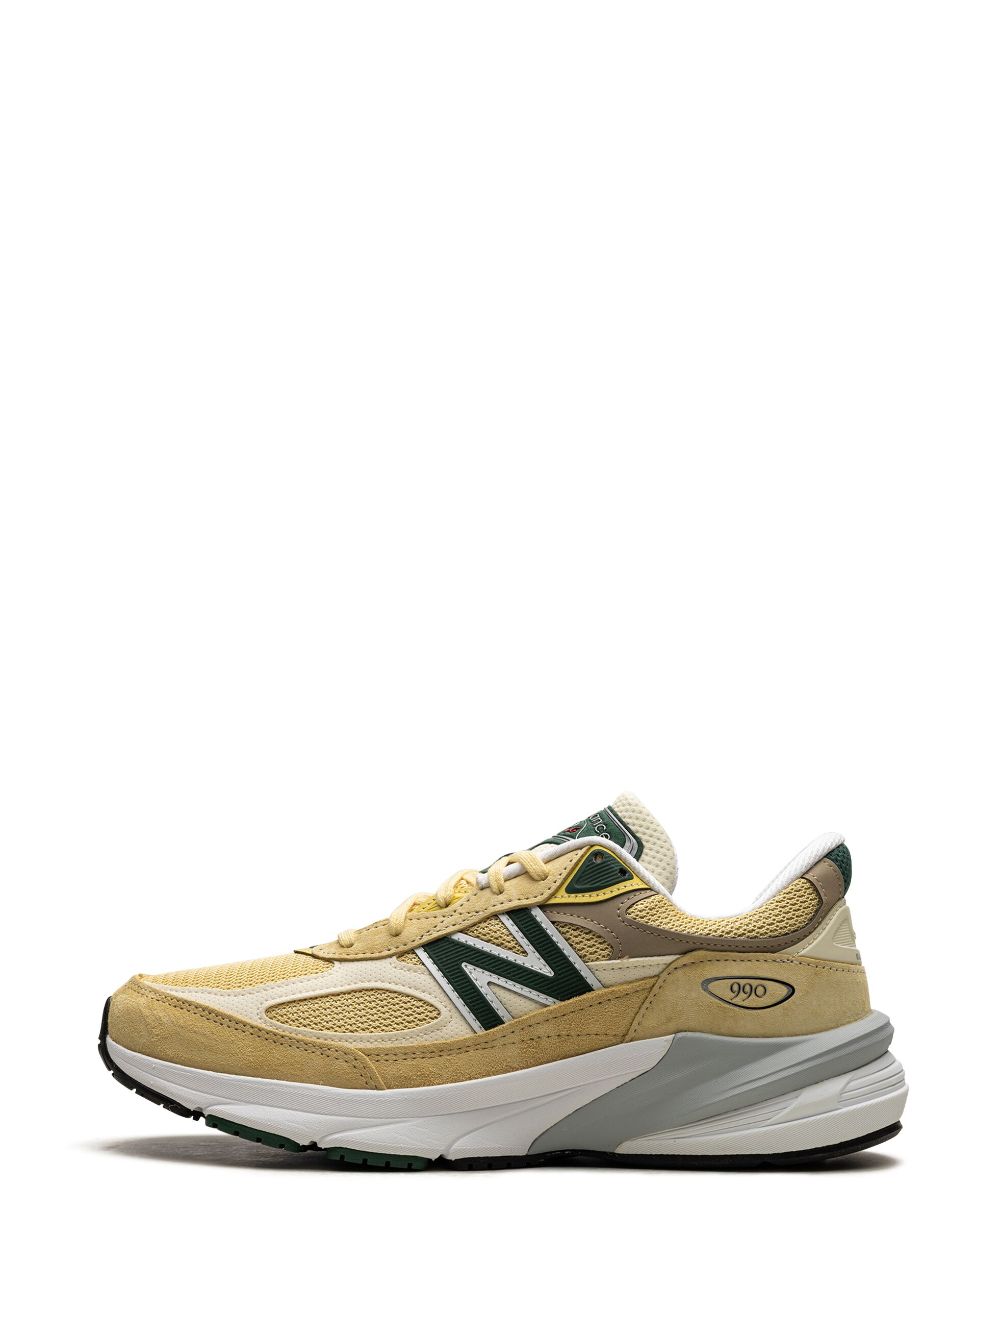 New Balance 990 "Pale Yellow Forest Green" sneakers